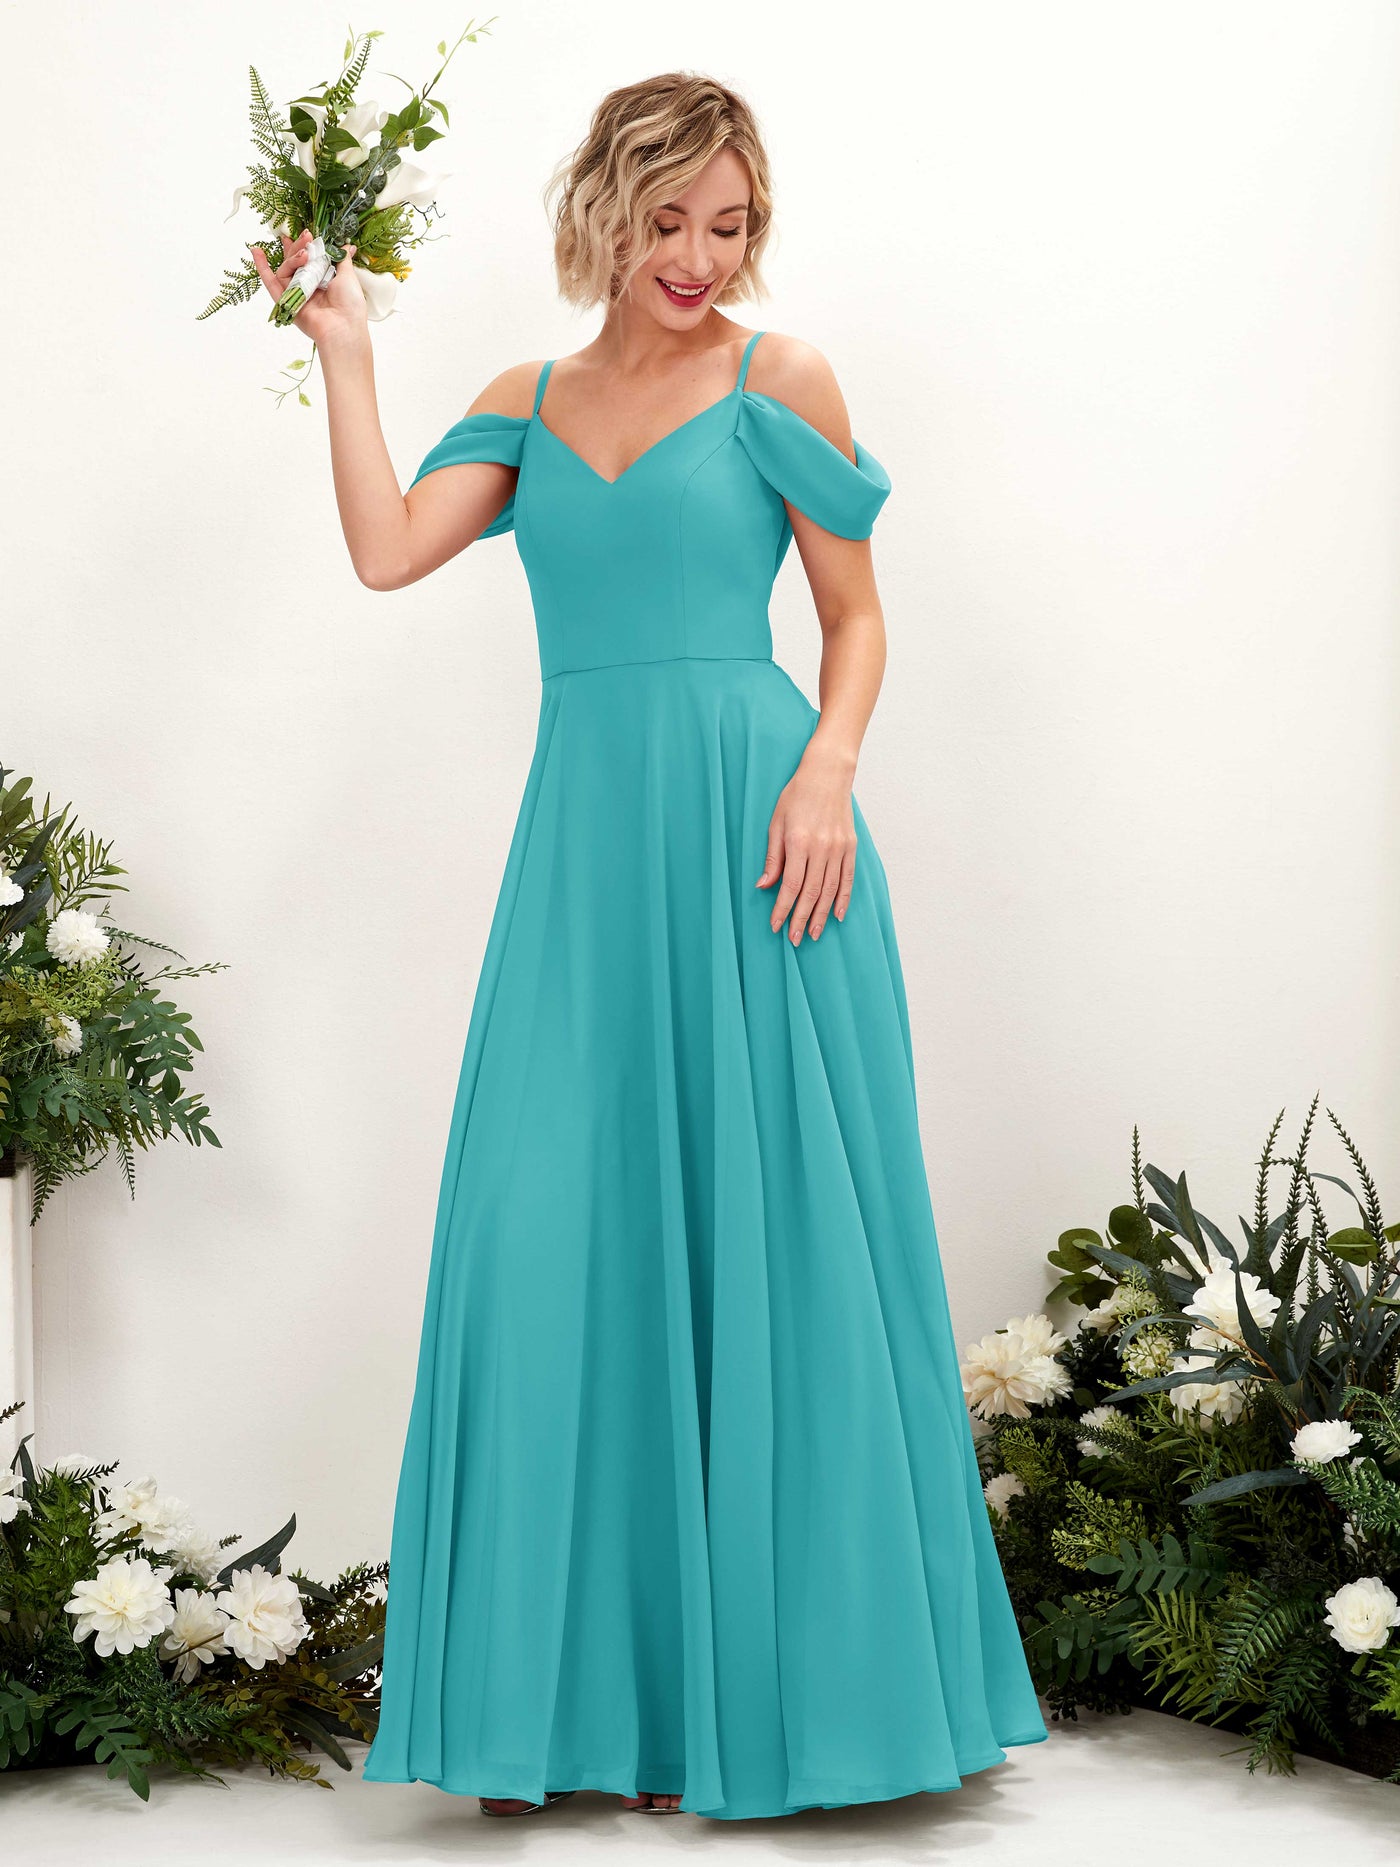 Turquoise Bridesmaid Dresses Bridesmaid Dress A-line Chiffon Off Shoulder Full Length Sleeveless Wedding Party Dress (81224923)#color_turquoise